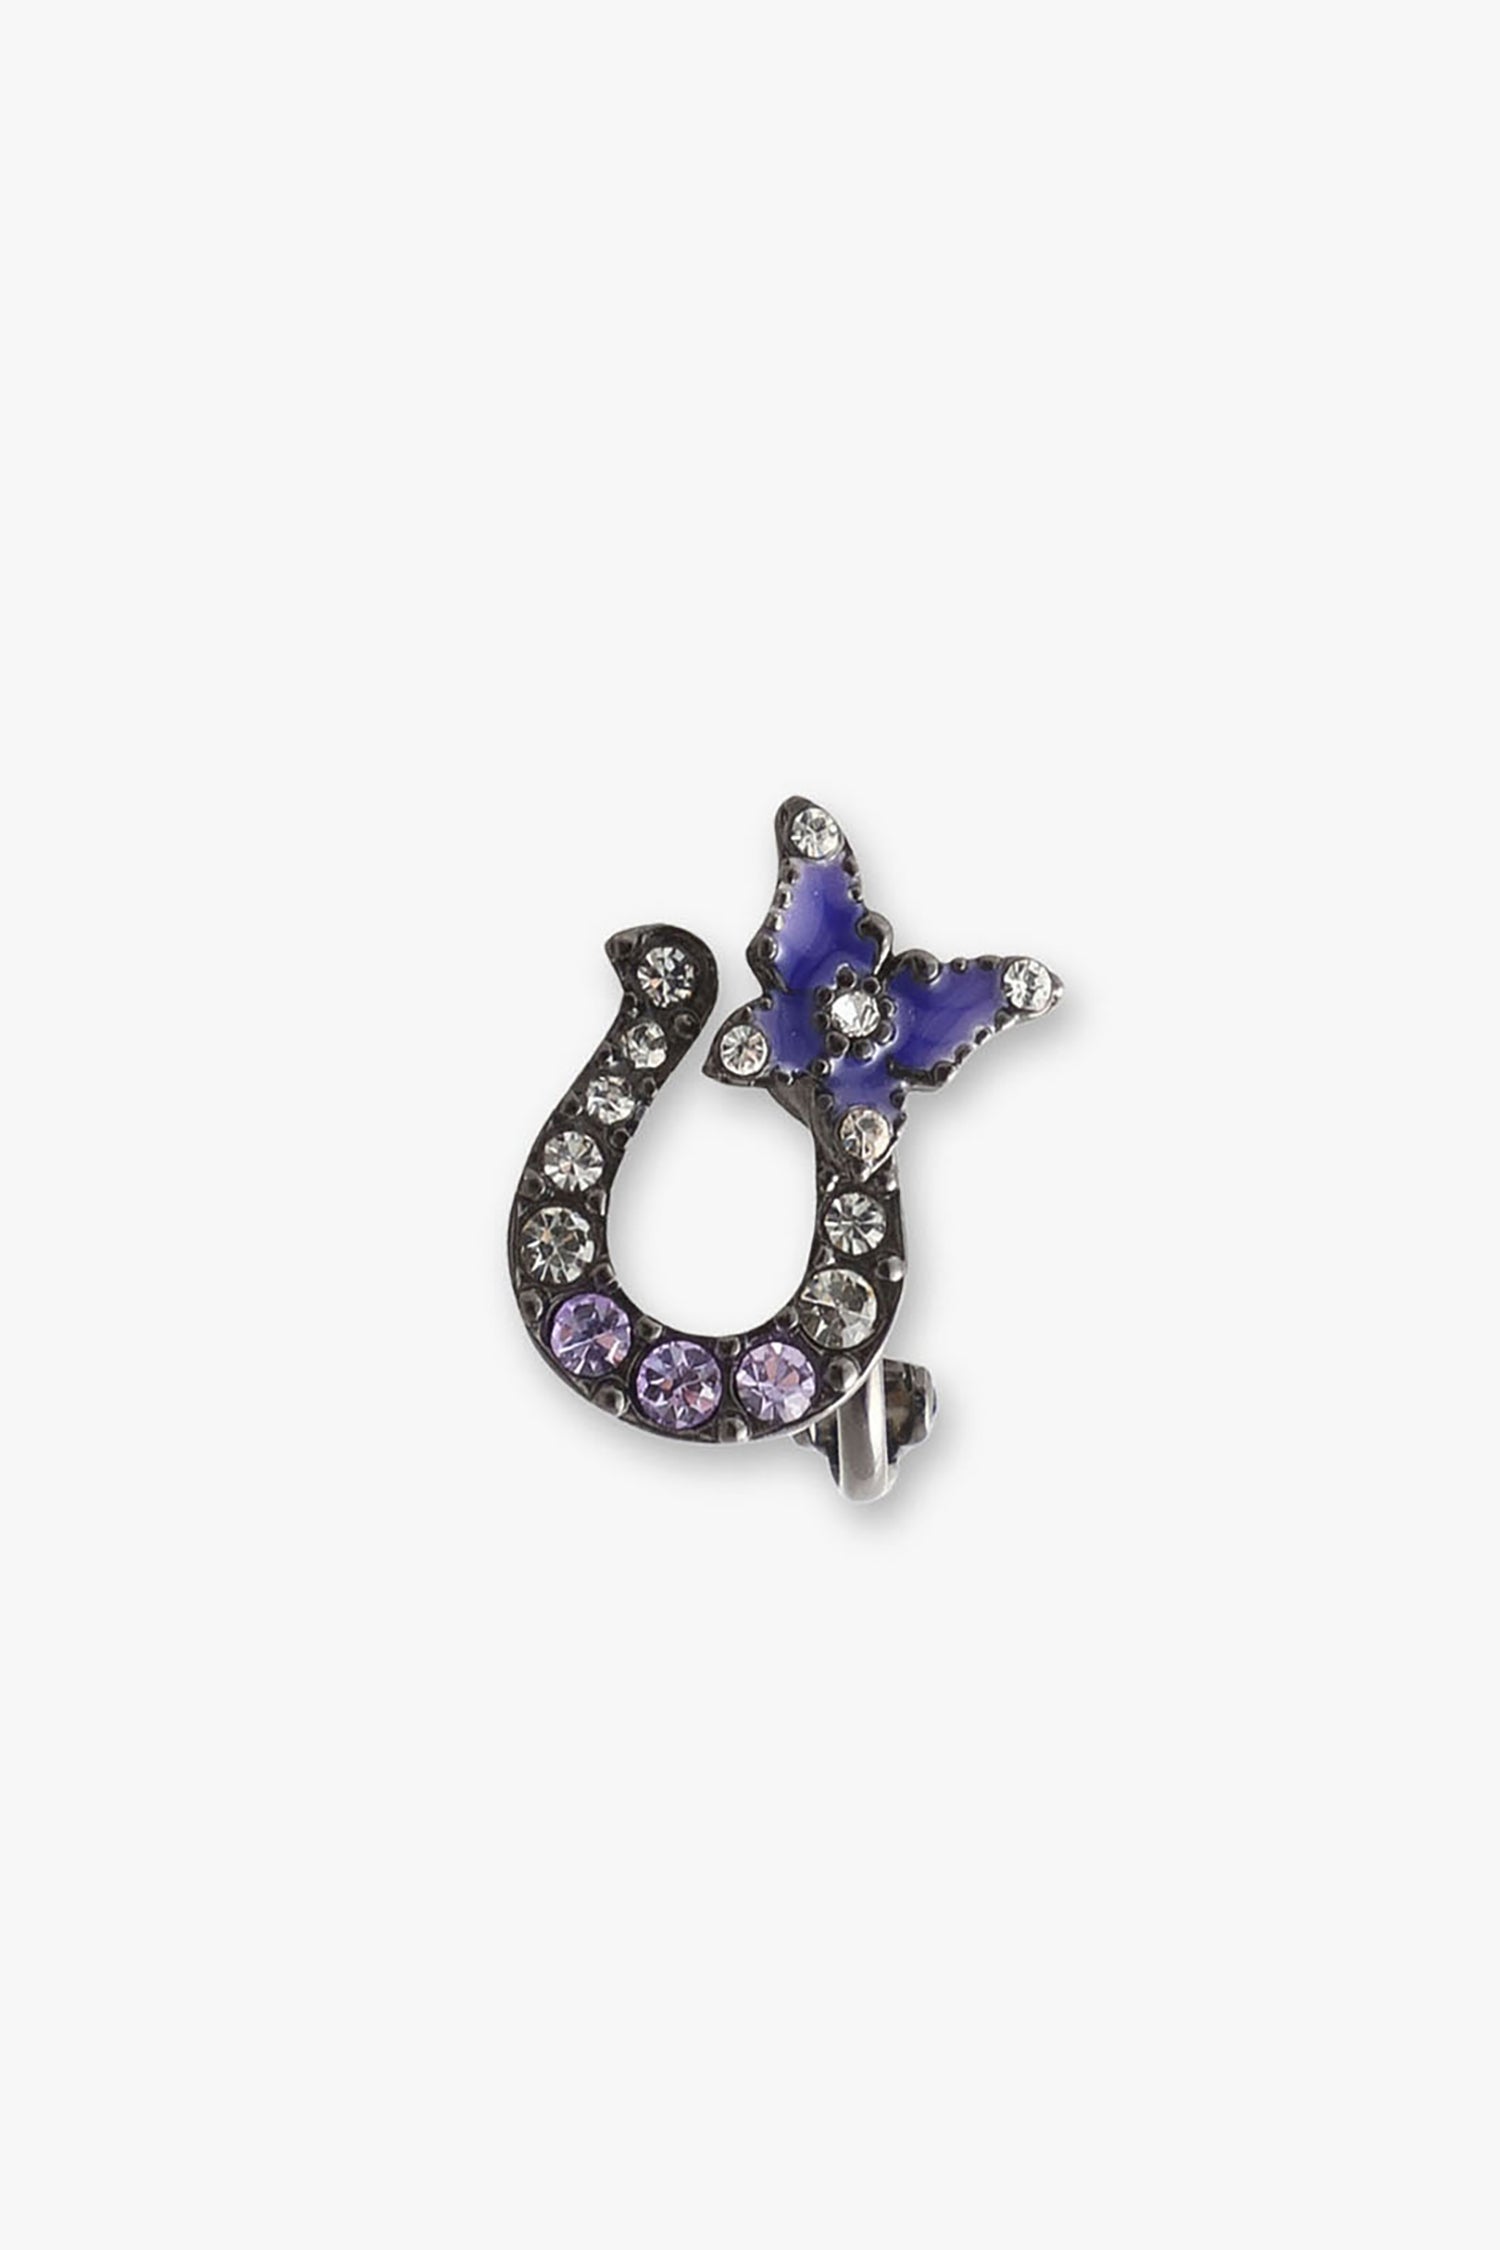 Gunmetal horseshoe Embellished with Gems, a purple butterfly on top left